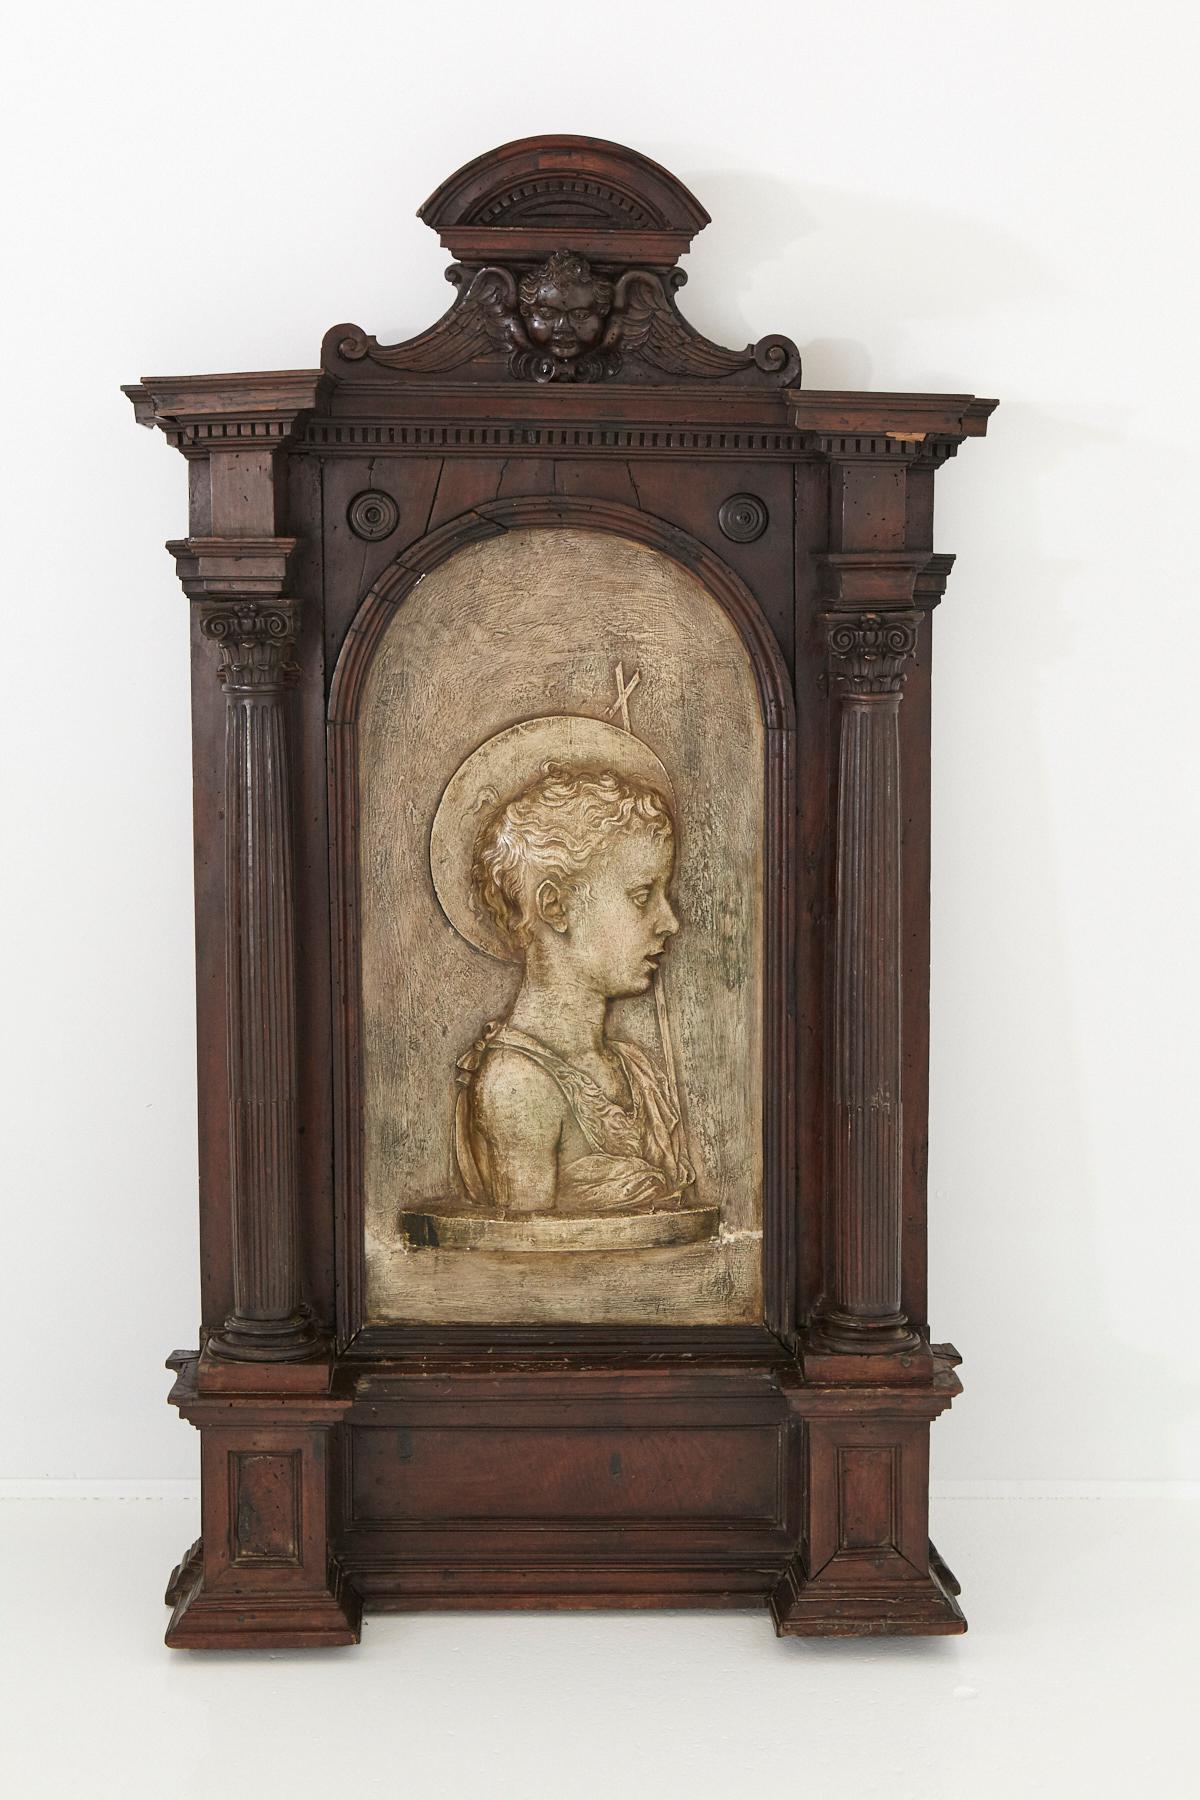 An impressive, large Italian Baroque tabernacle hand carved frame from the late 18th century,
which reflects the Renaissance influence of Classical Greek and Italian temples with its columns on both sides and the embellishment of the piece through